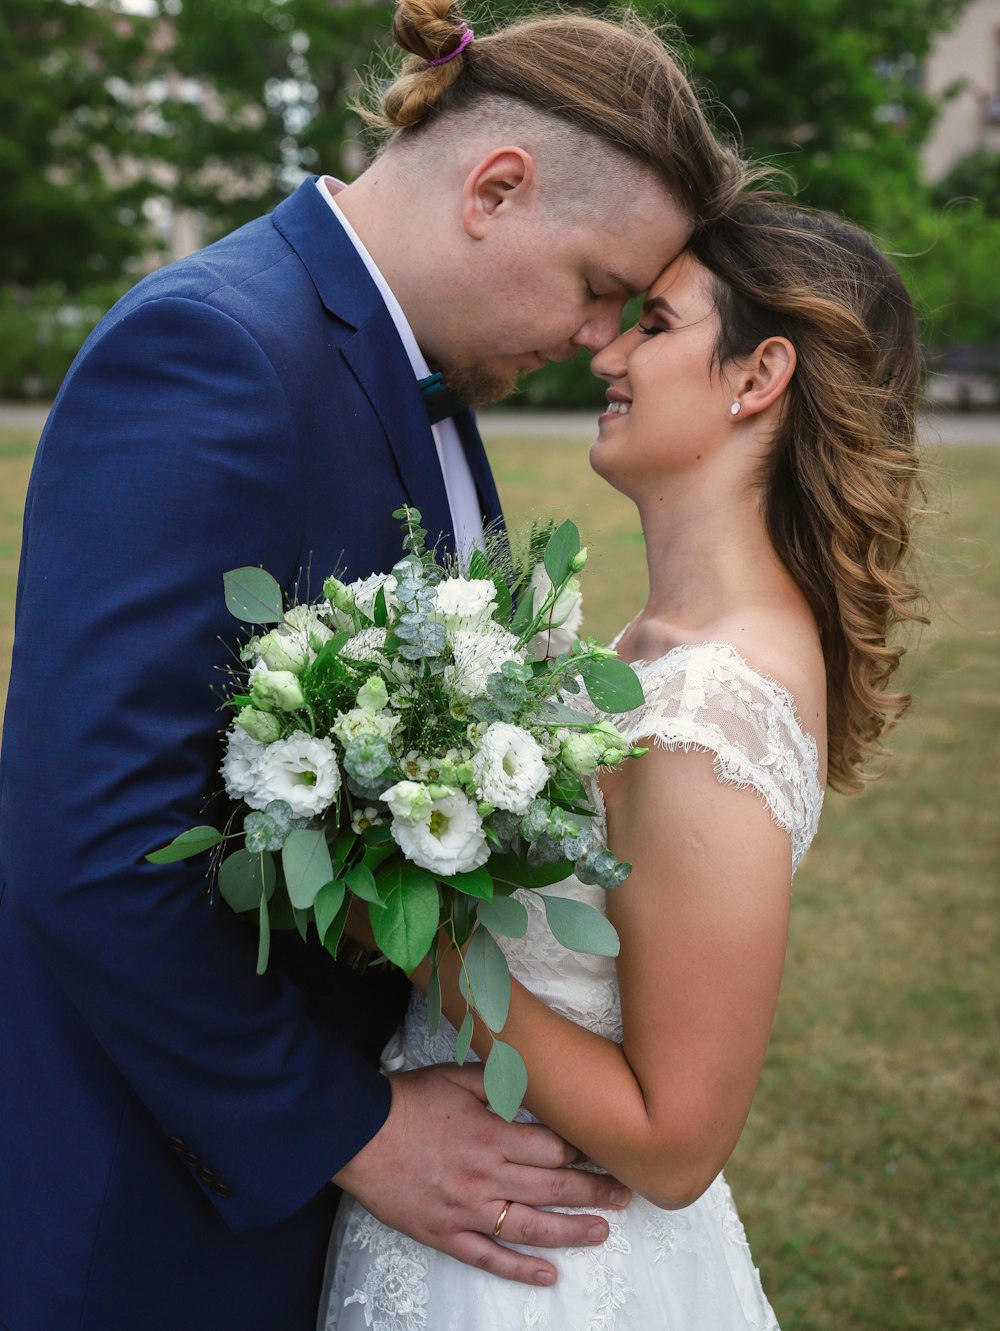 man in blue suit kissing woman in white floral wedding dress